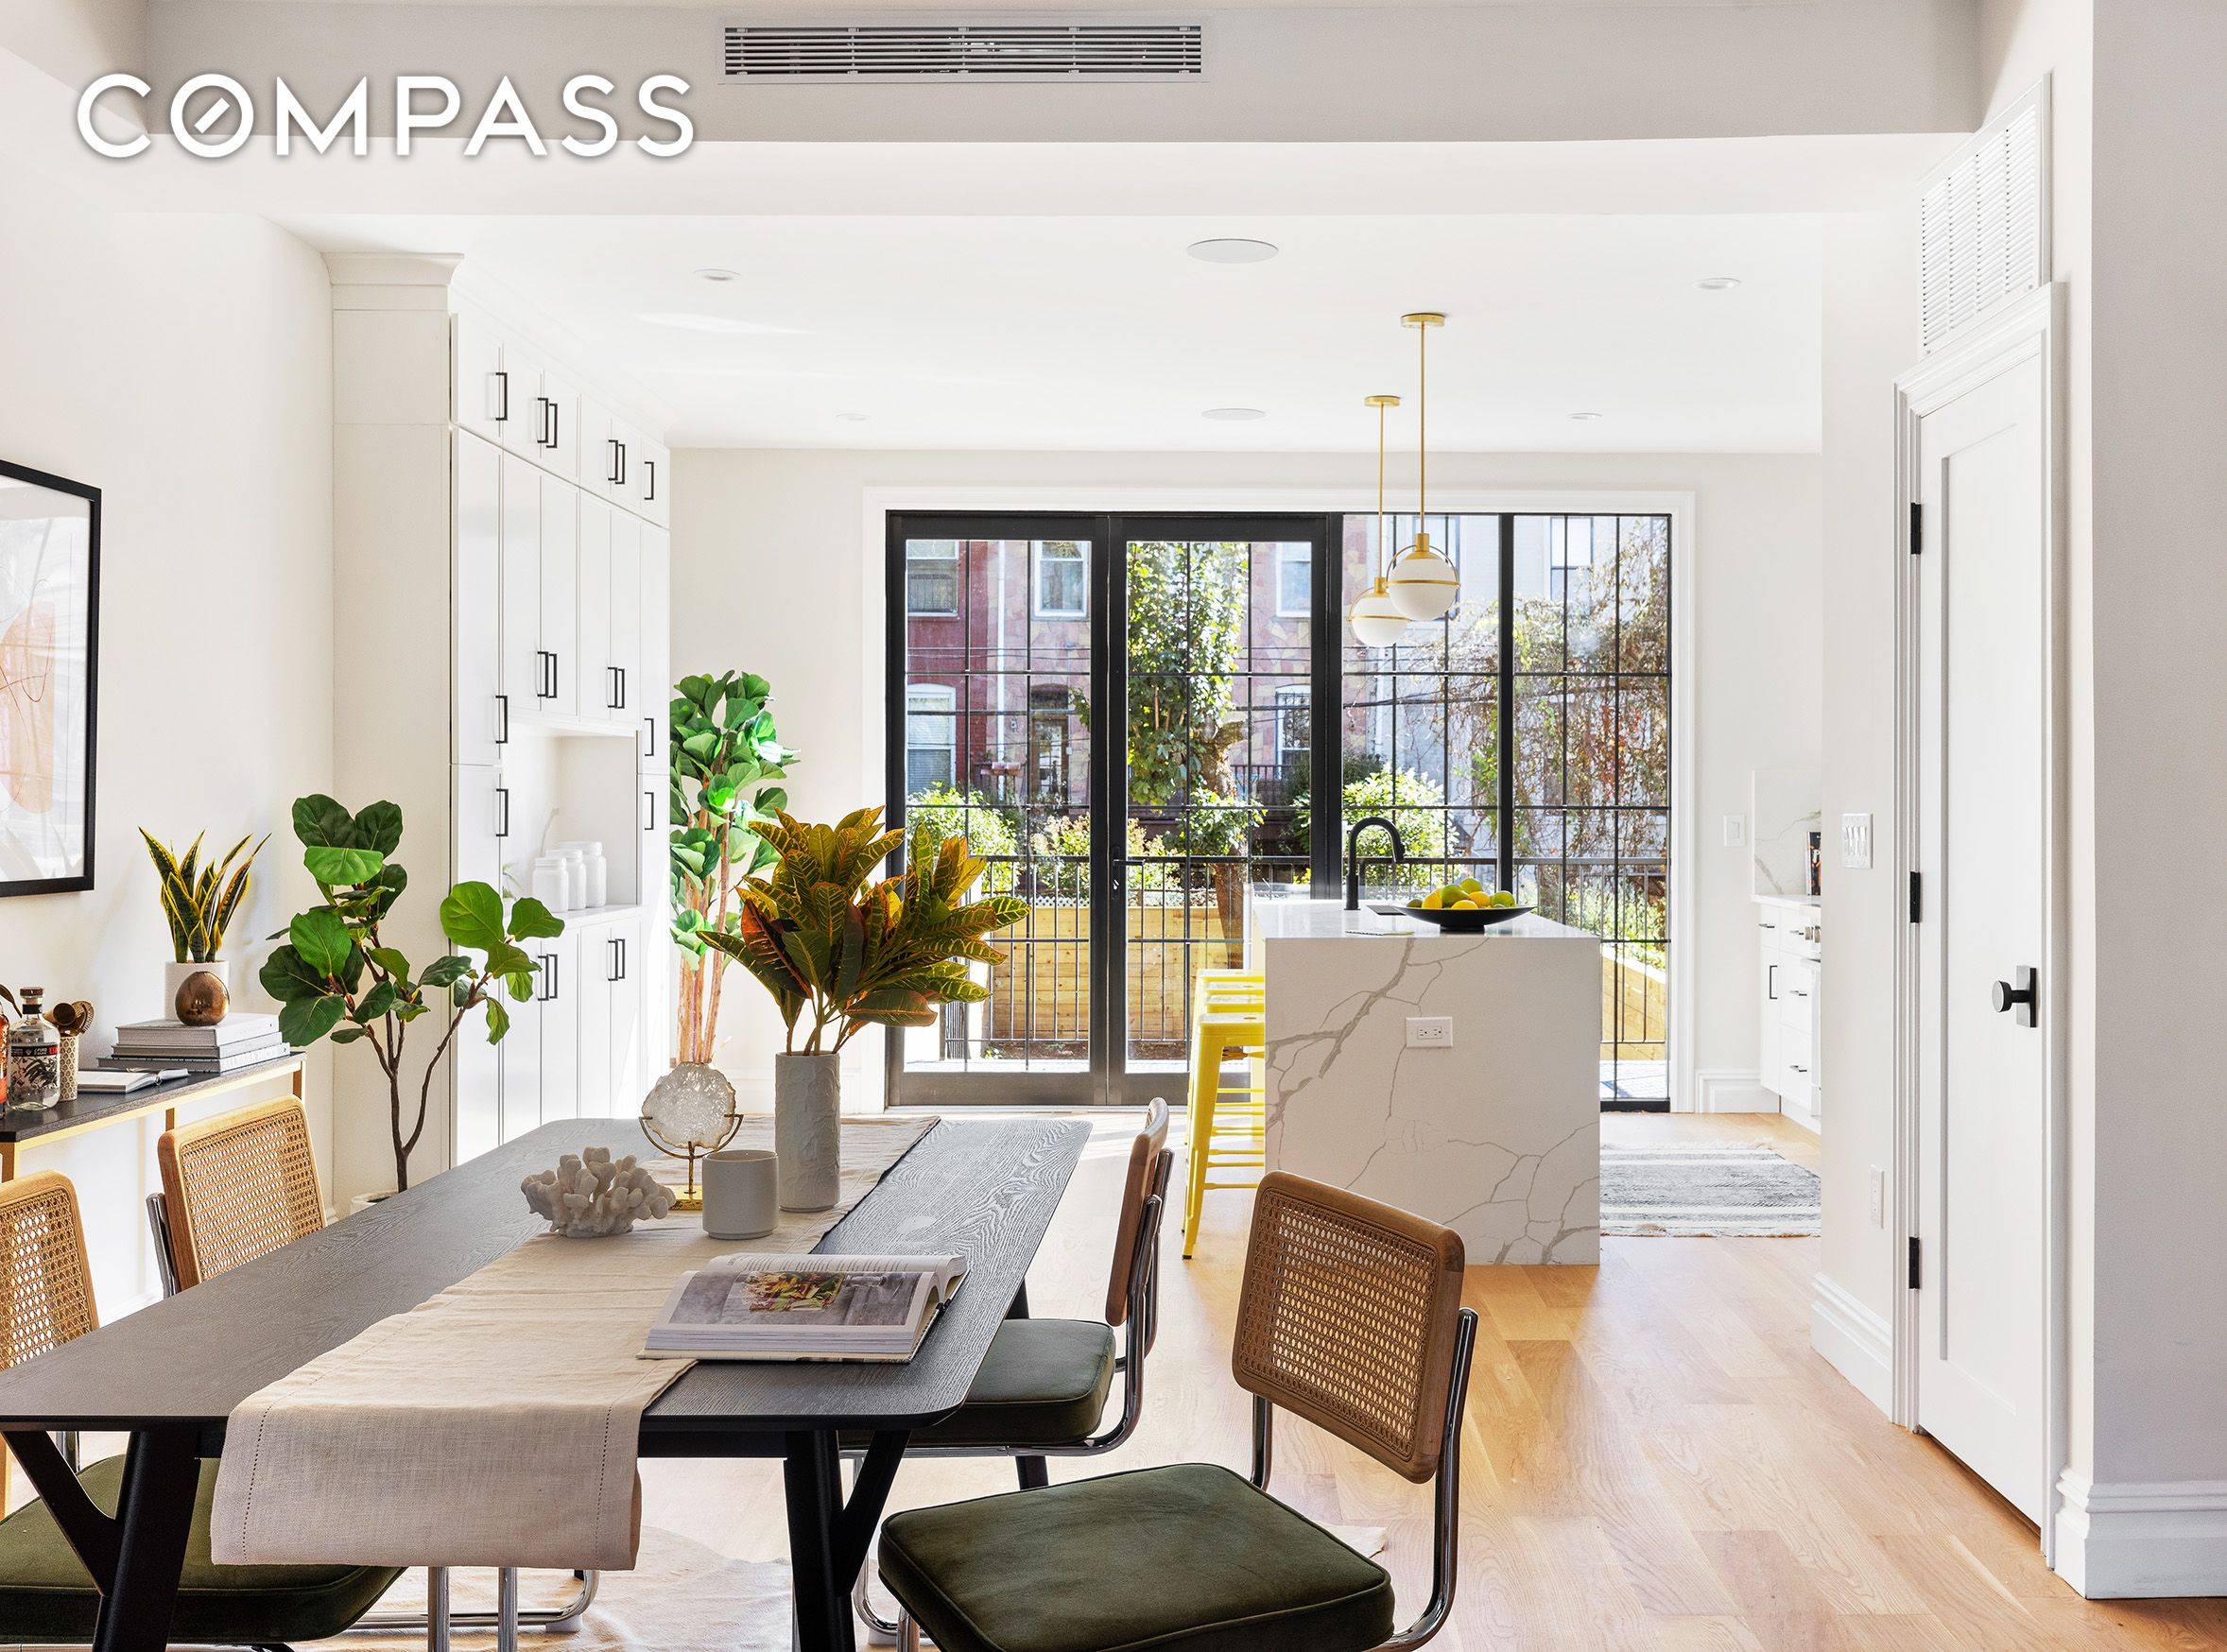 116 Cooper Street is a newly renovated two family townhouse that features five bedrooms, three bathrooms, two powder rooms, and a finished basement.